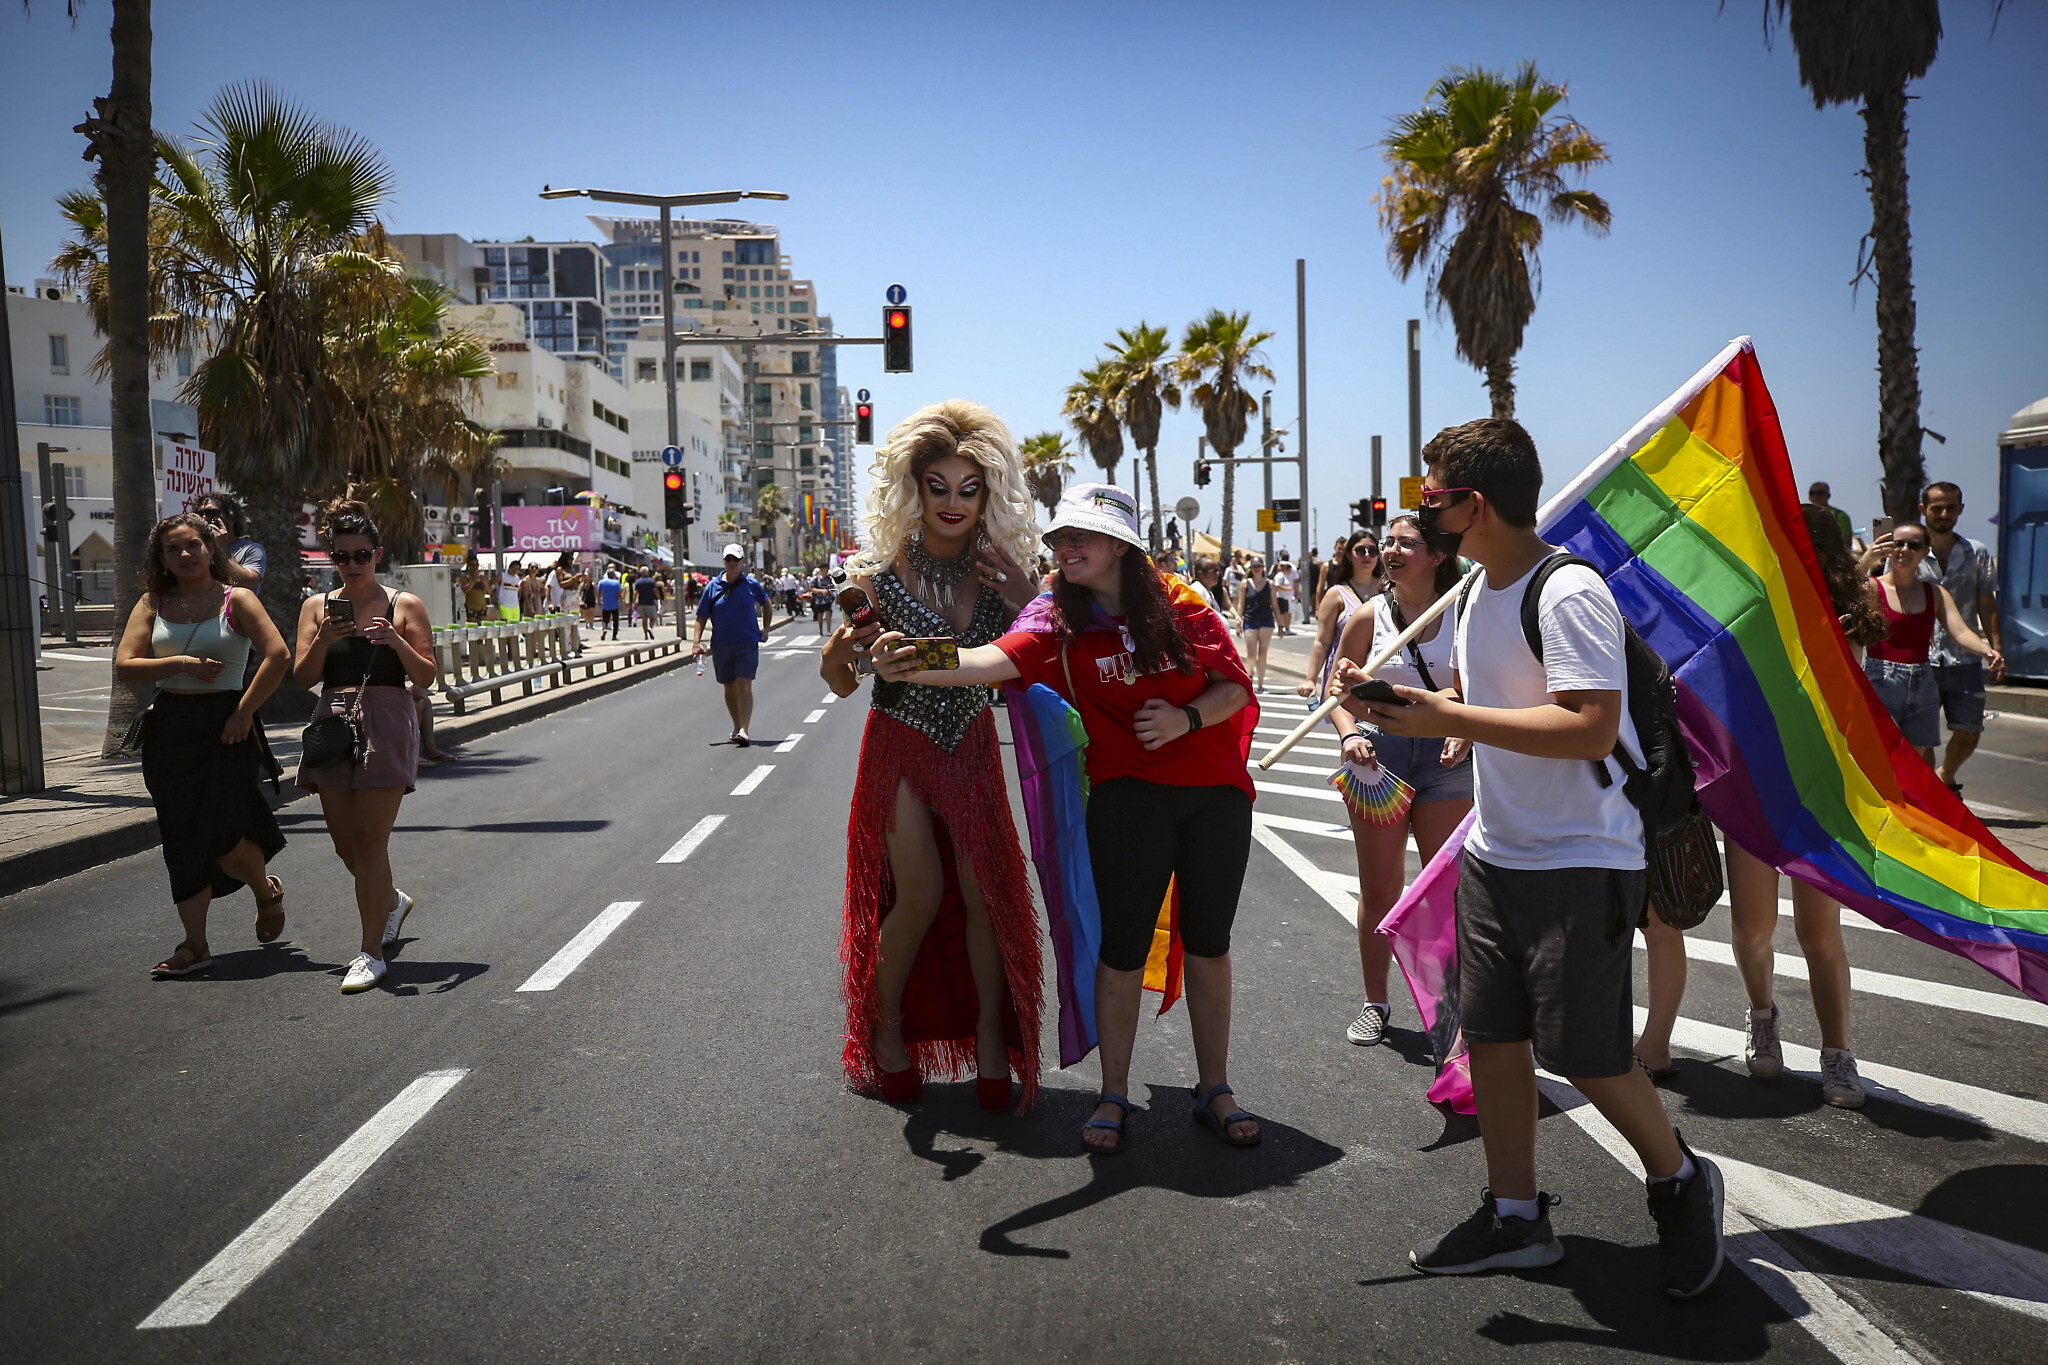 when is the gay pride parade in long beach